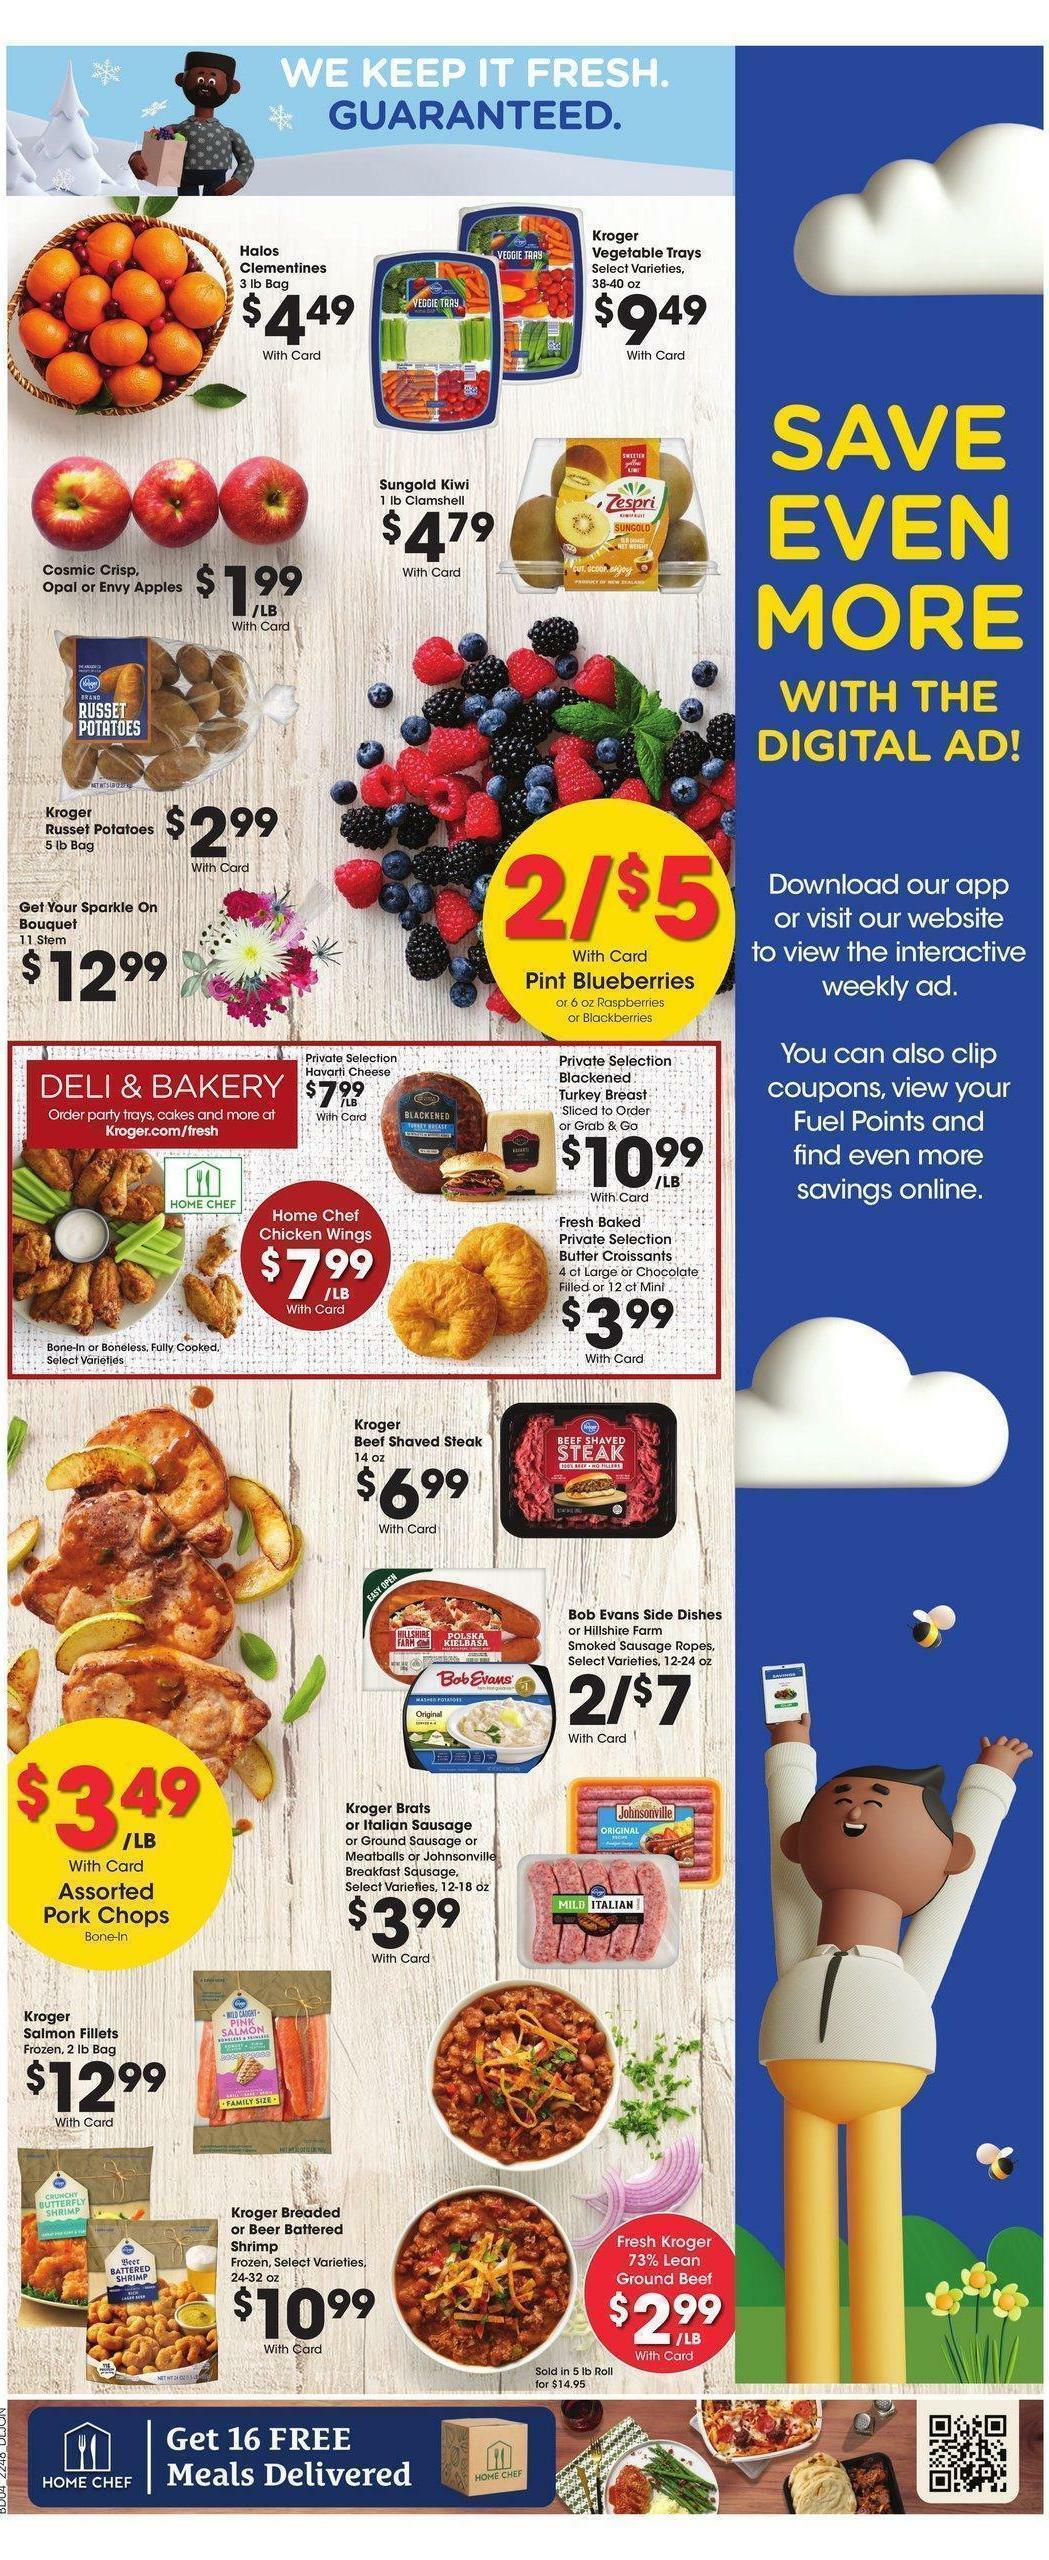 Kroger Weekly Ad from December 28